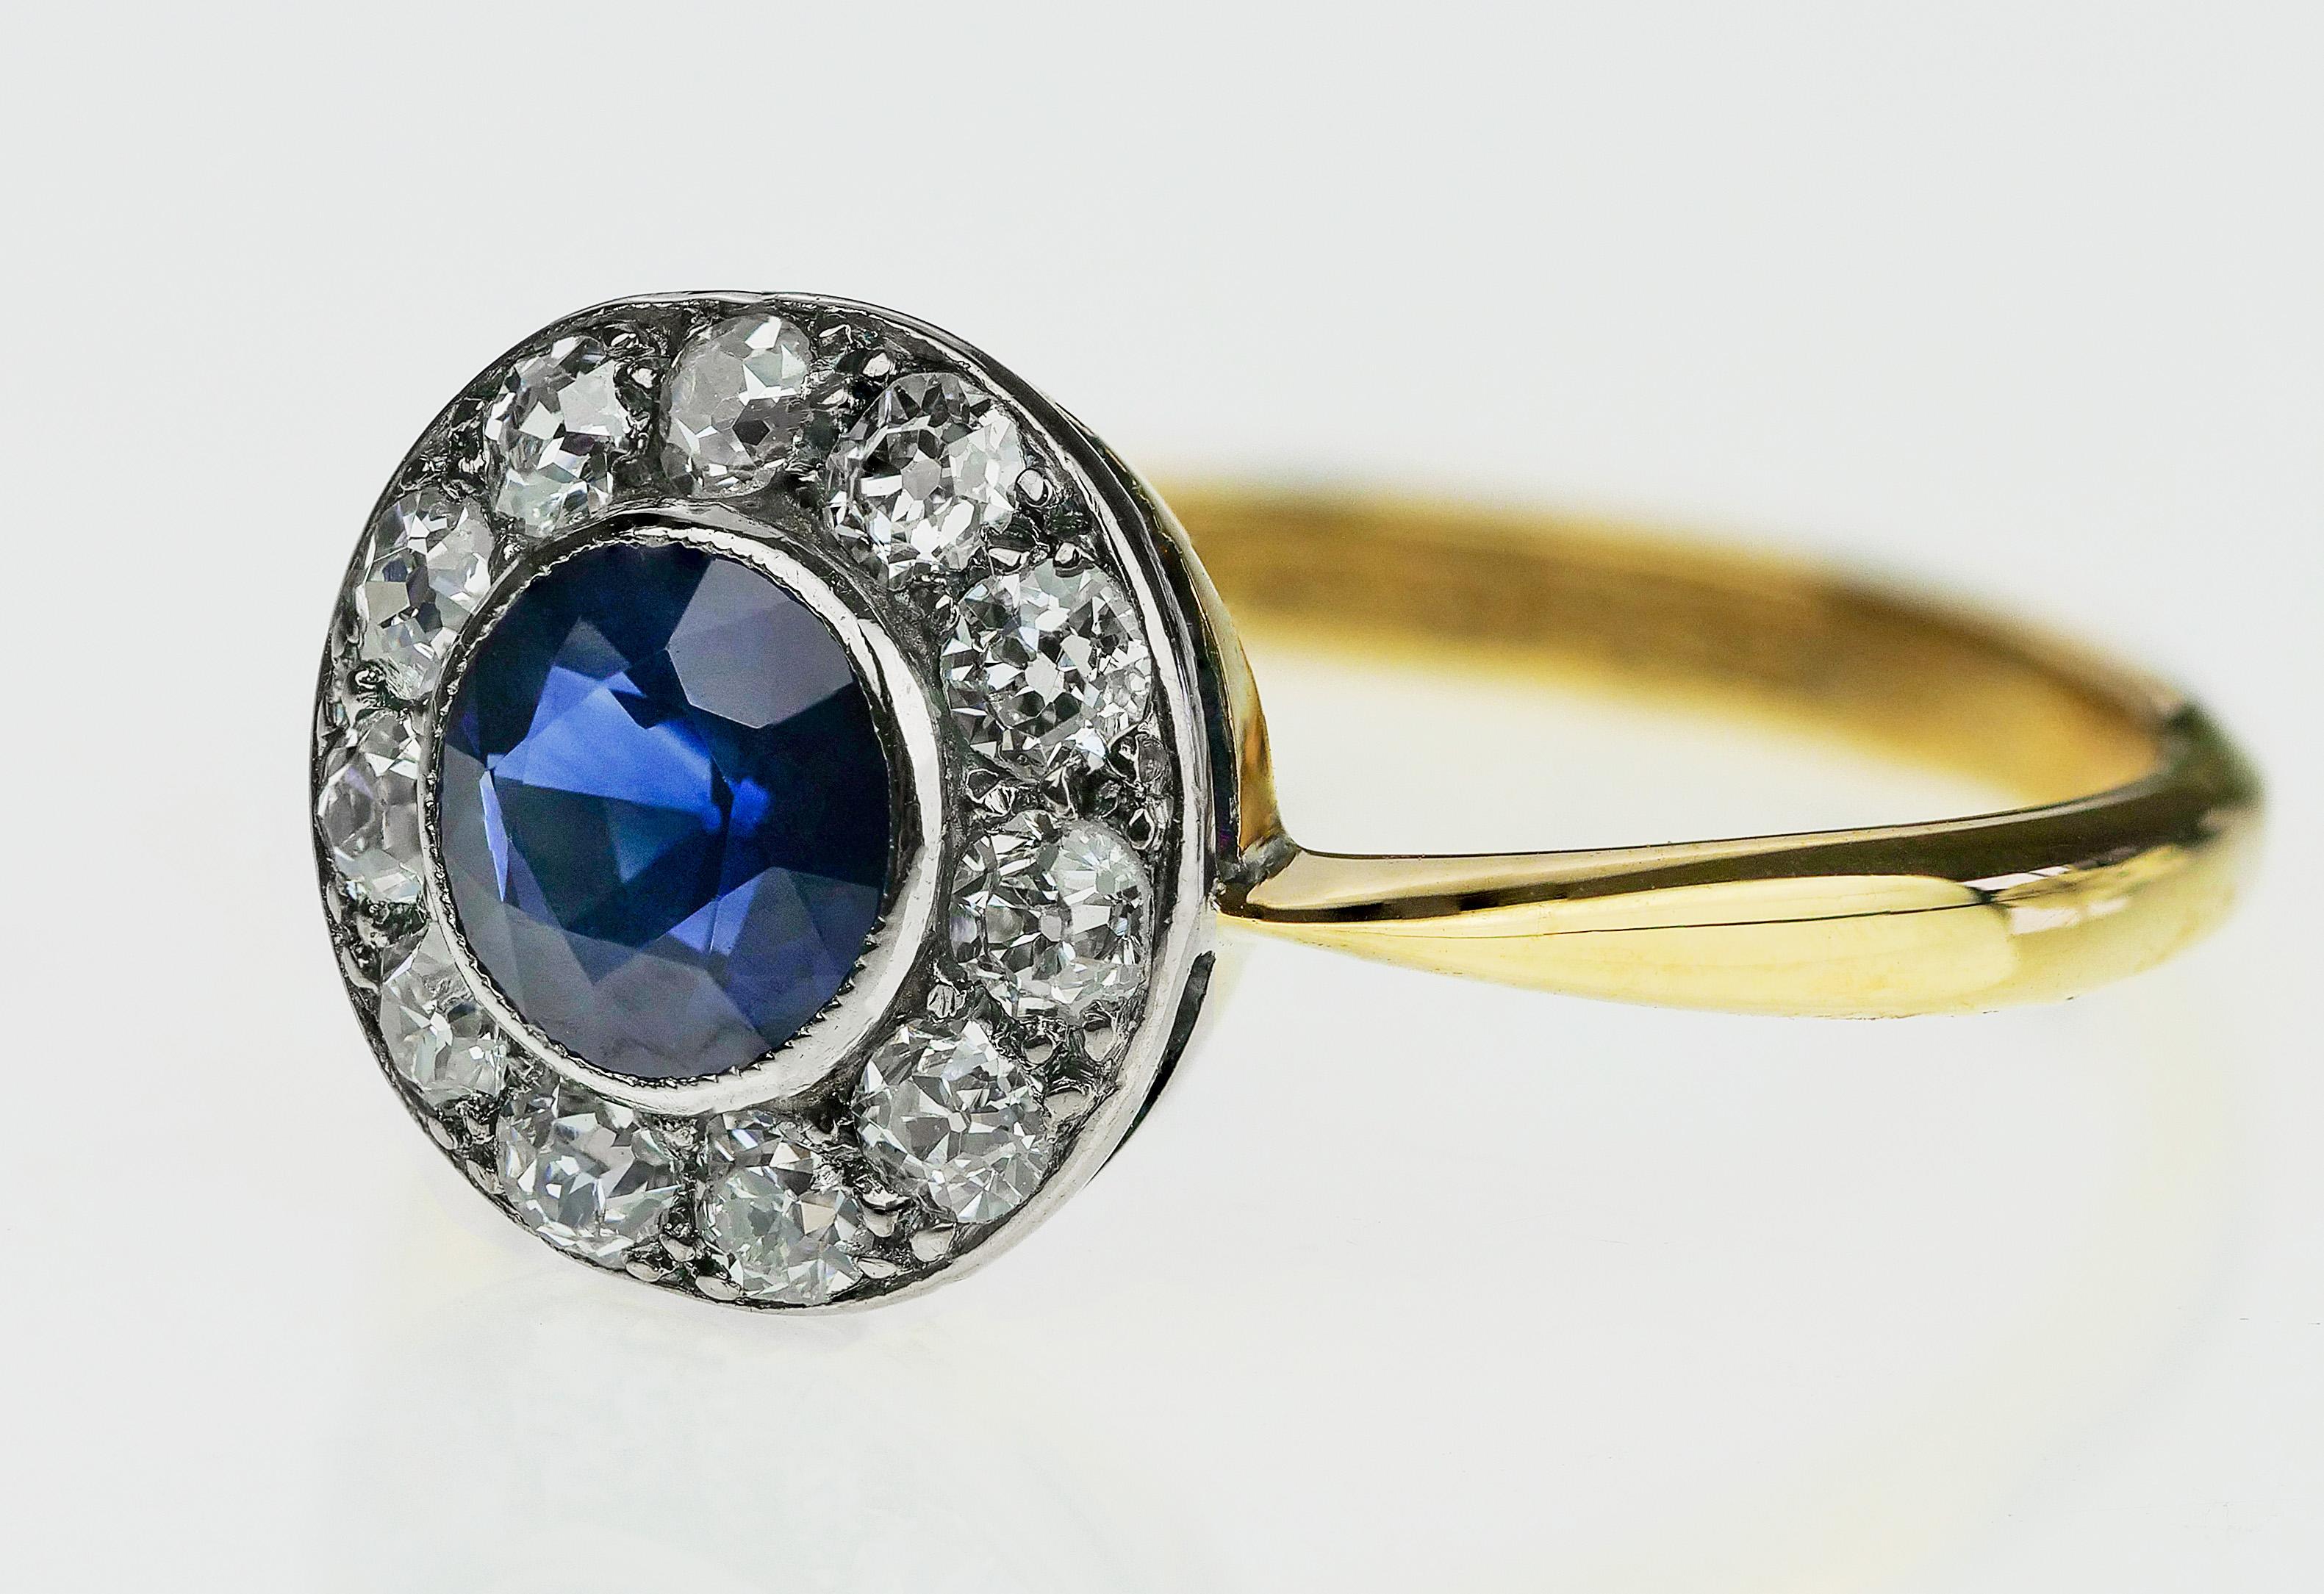 Sapphire and diamond cluster ring in 18 ct yellow gold and platinum. Sapphire is surrounded by 11 old European cut diamonds, the white diamonds sparkles and complements the blue colour sapphire.
1 x round Sapphire, approximate weight 0.75 carats
11